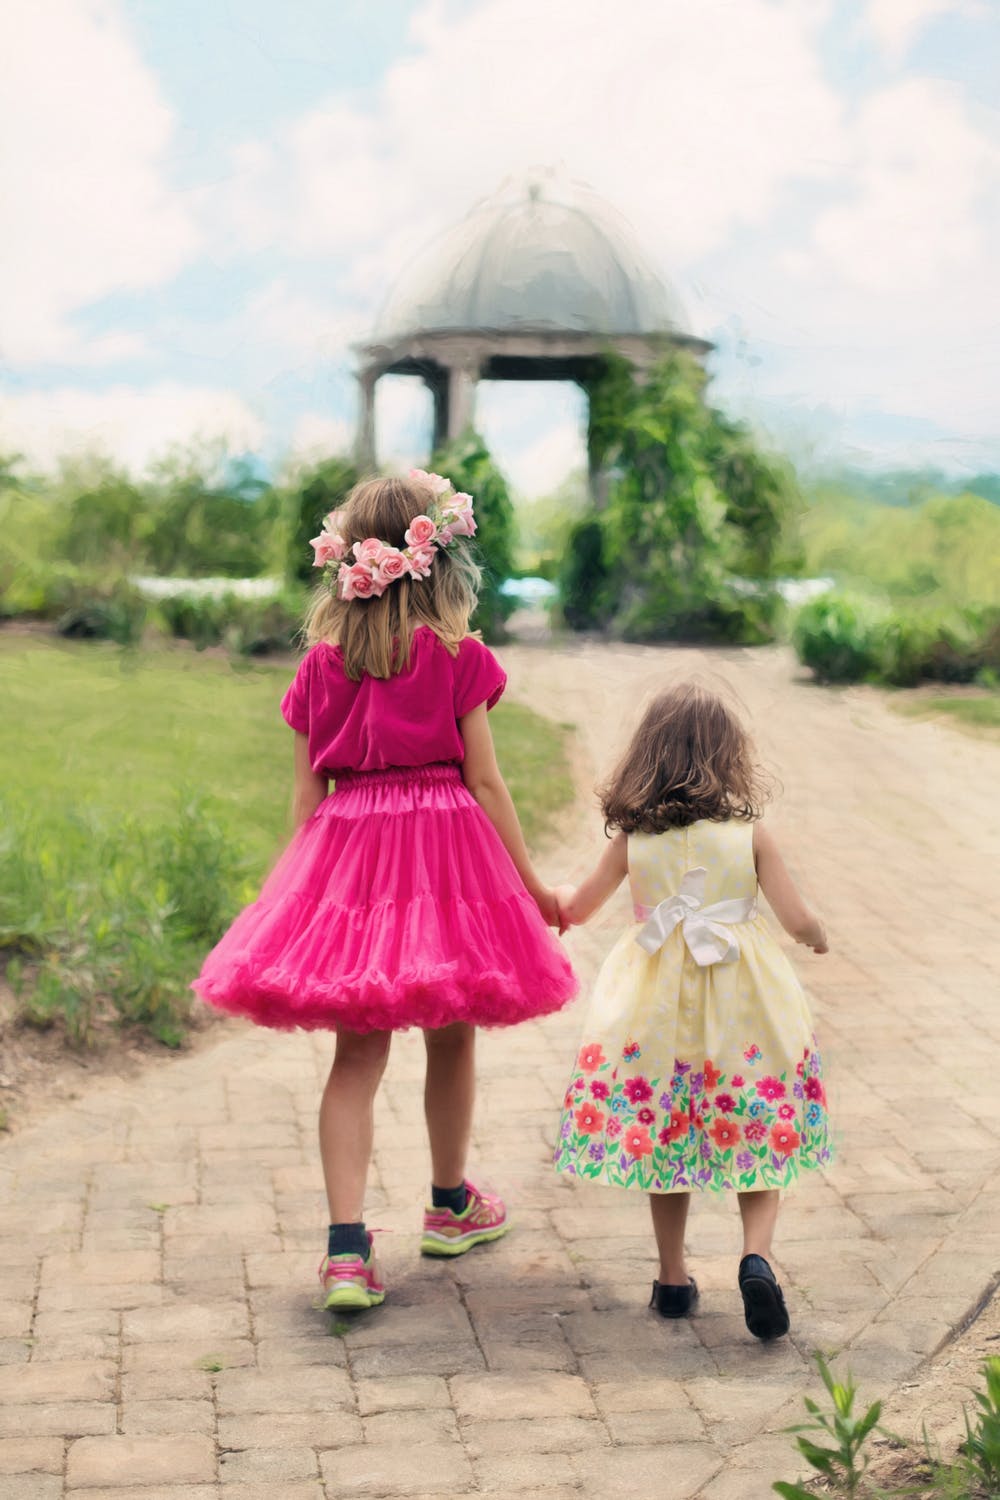 Decoding Dress Codes: A Guide to Levels of Formality (And How to Dress Your Little Girl For Each)